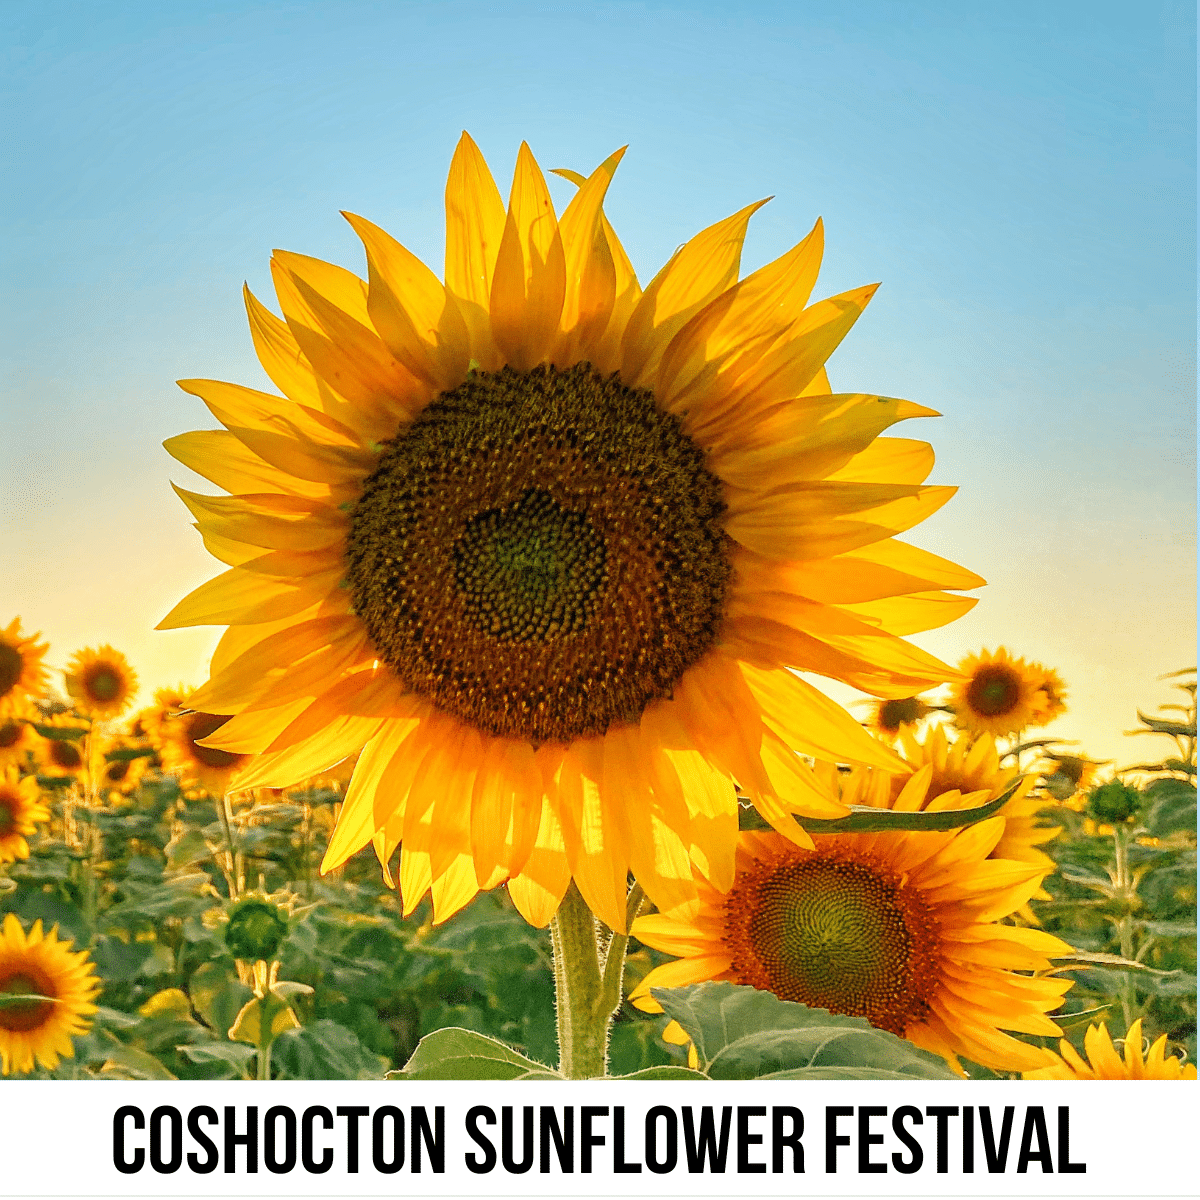 A square image of a close-up photo of a sunflower with a sunflower field in the background. A white strip across the bottom has text Coshocton Sunflower Festival.